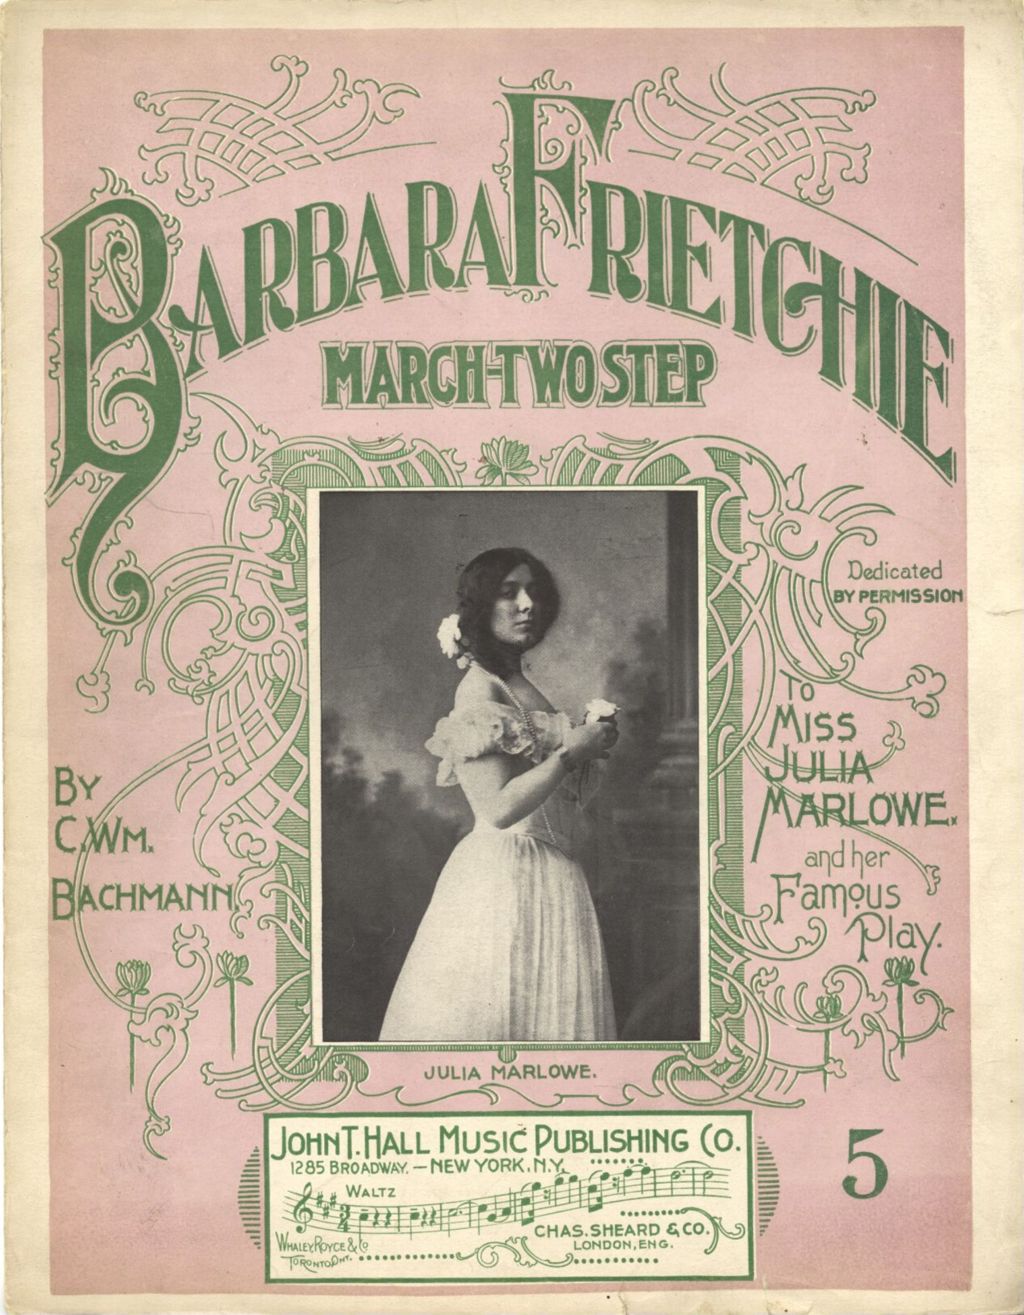 Barbara Frietchie (March and Two Step)